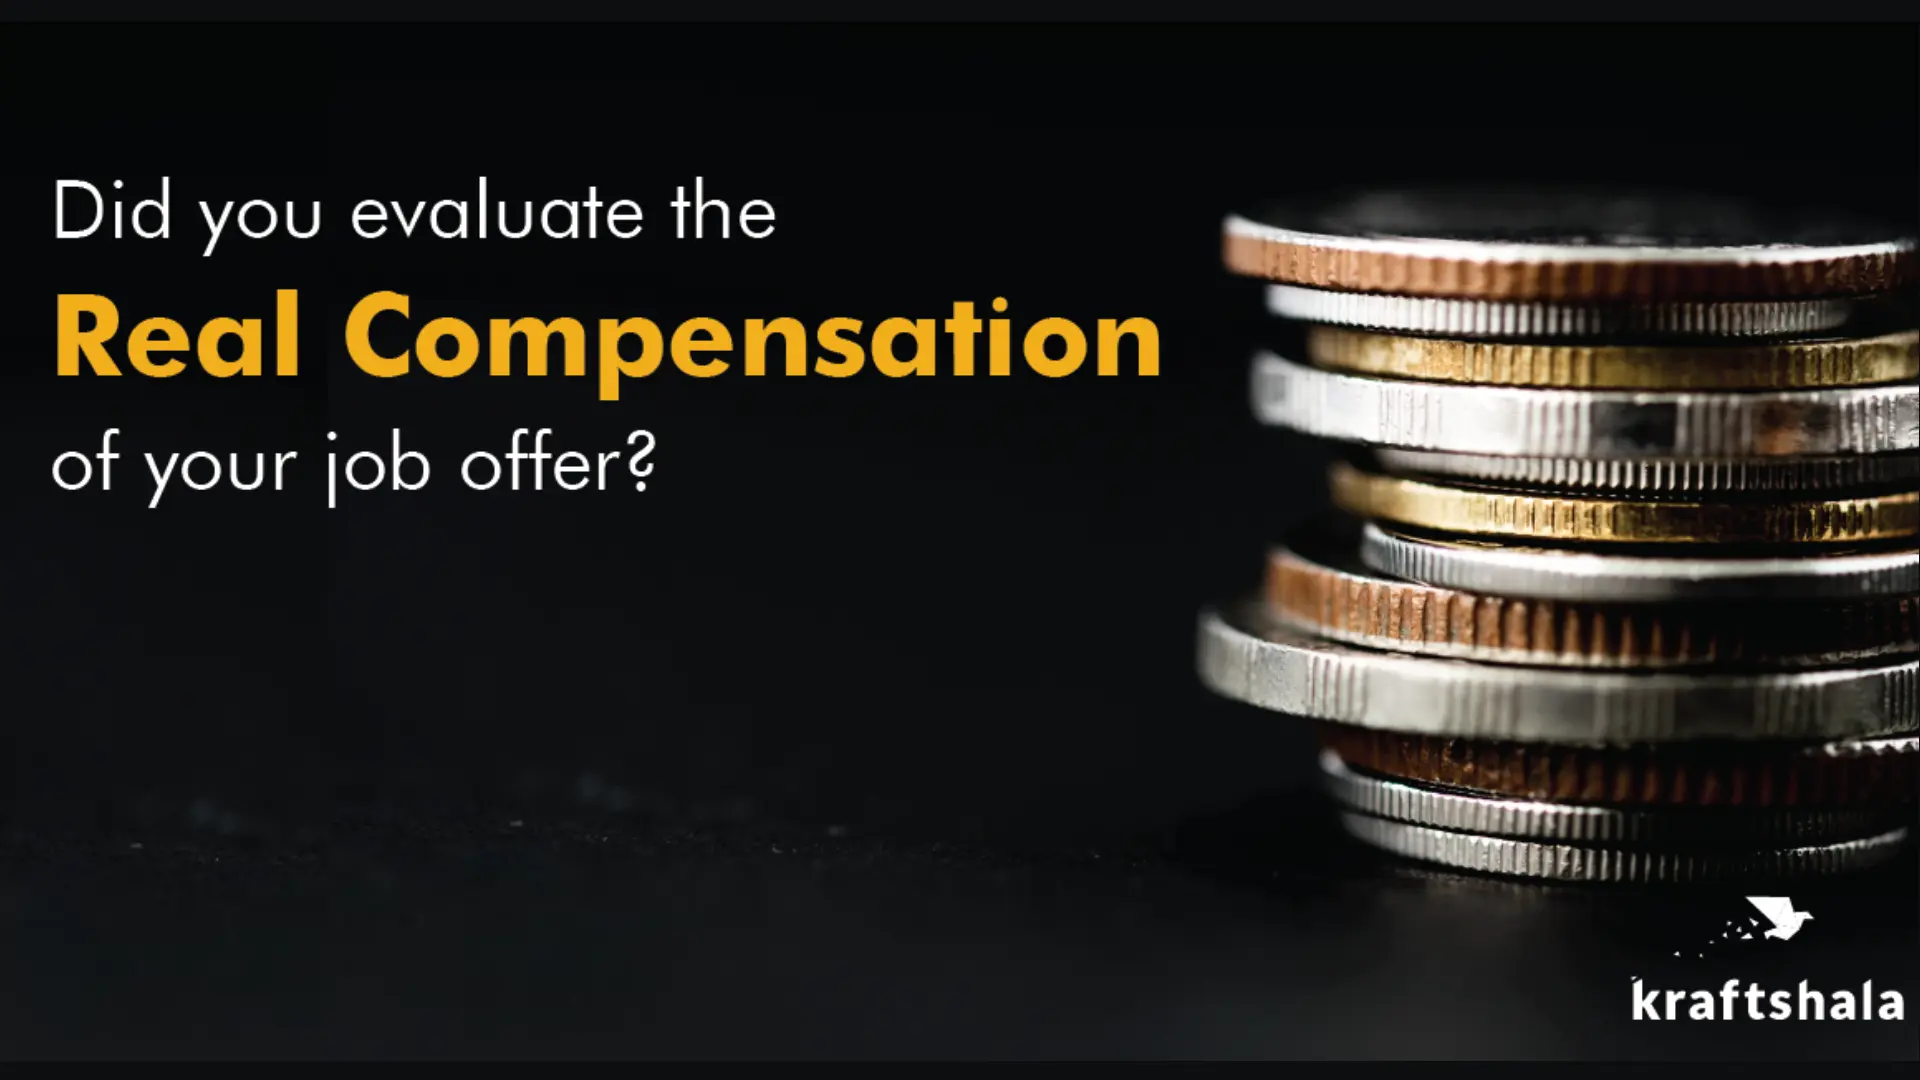 Did You Evaluate The Real Compensation of Your Job Offer?